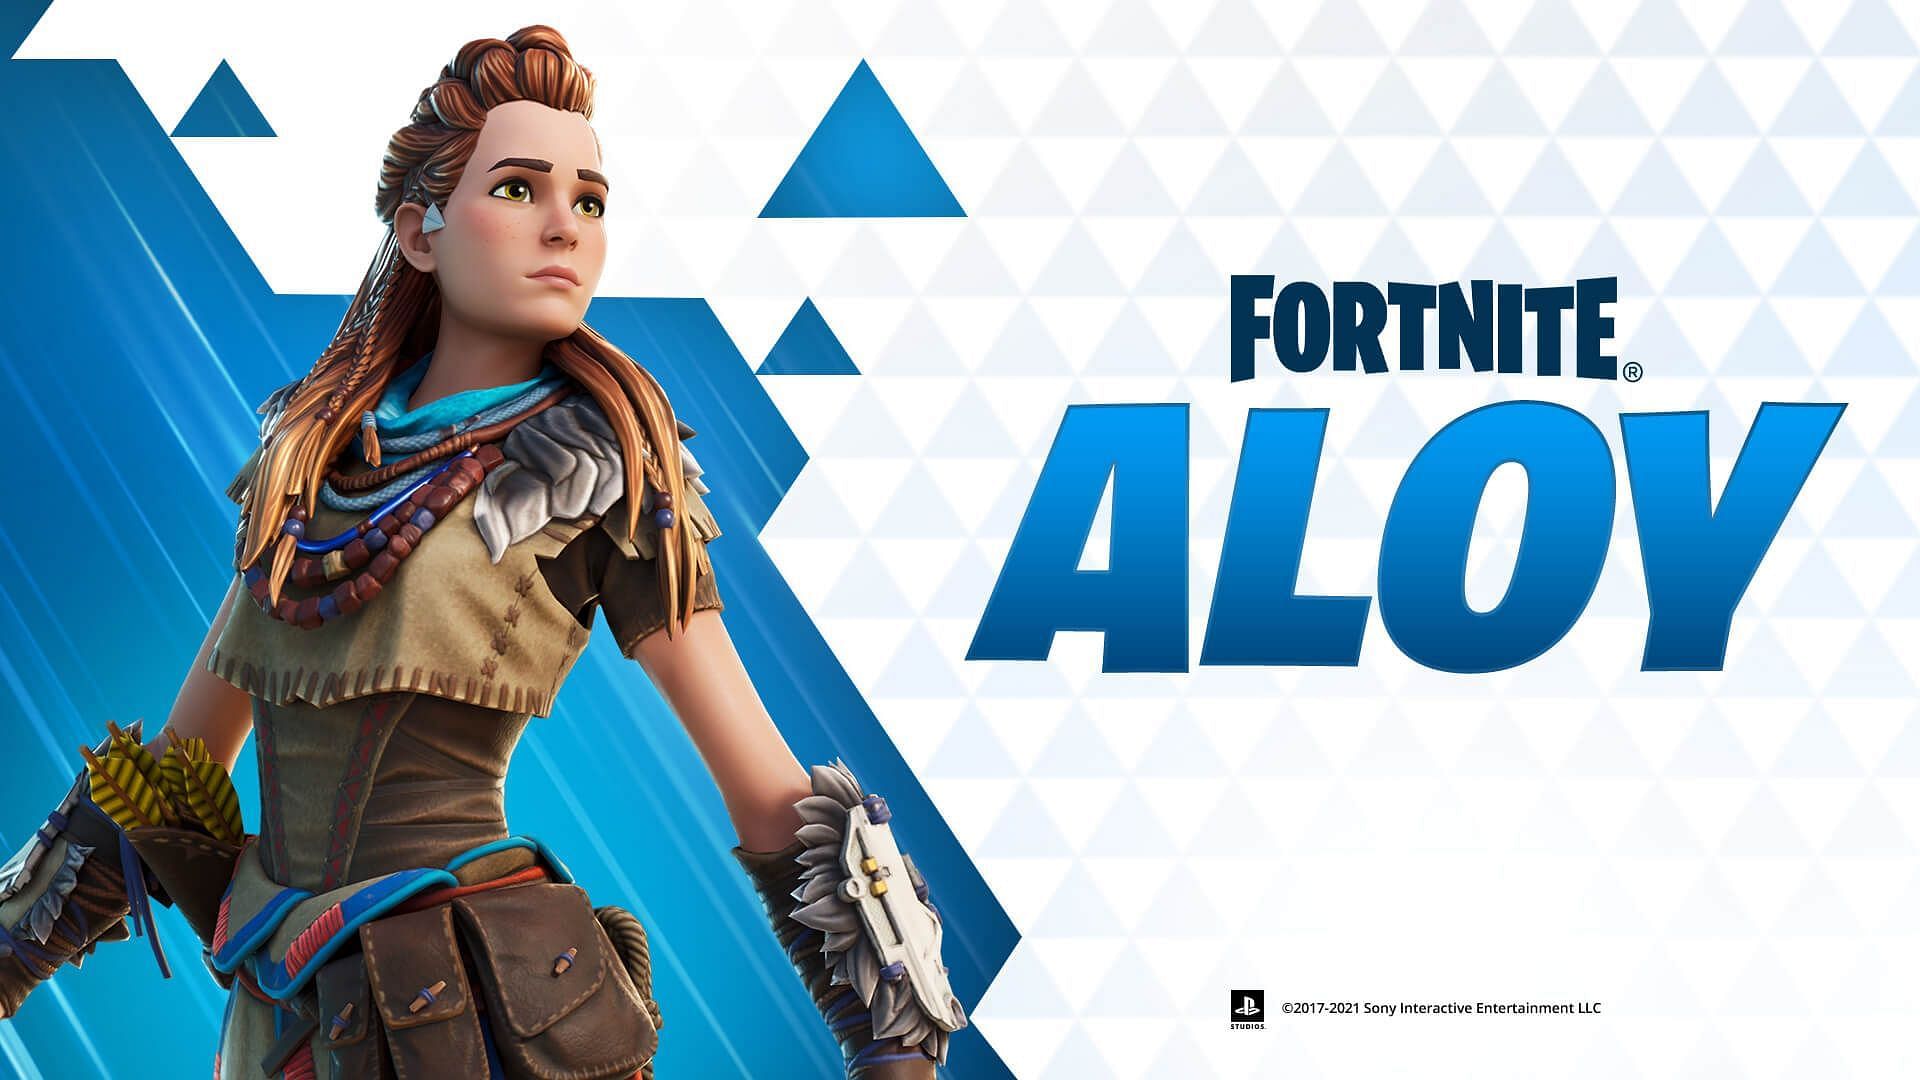 Many Fortnite collabs added popular gaming characters to the battle royale title (Image via Epic Games)